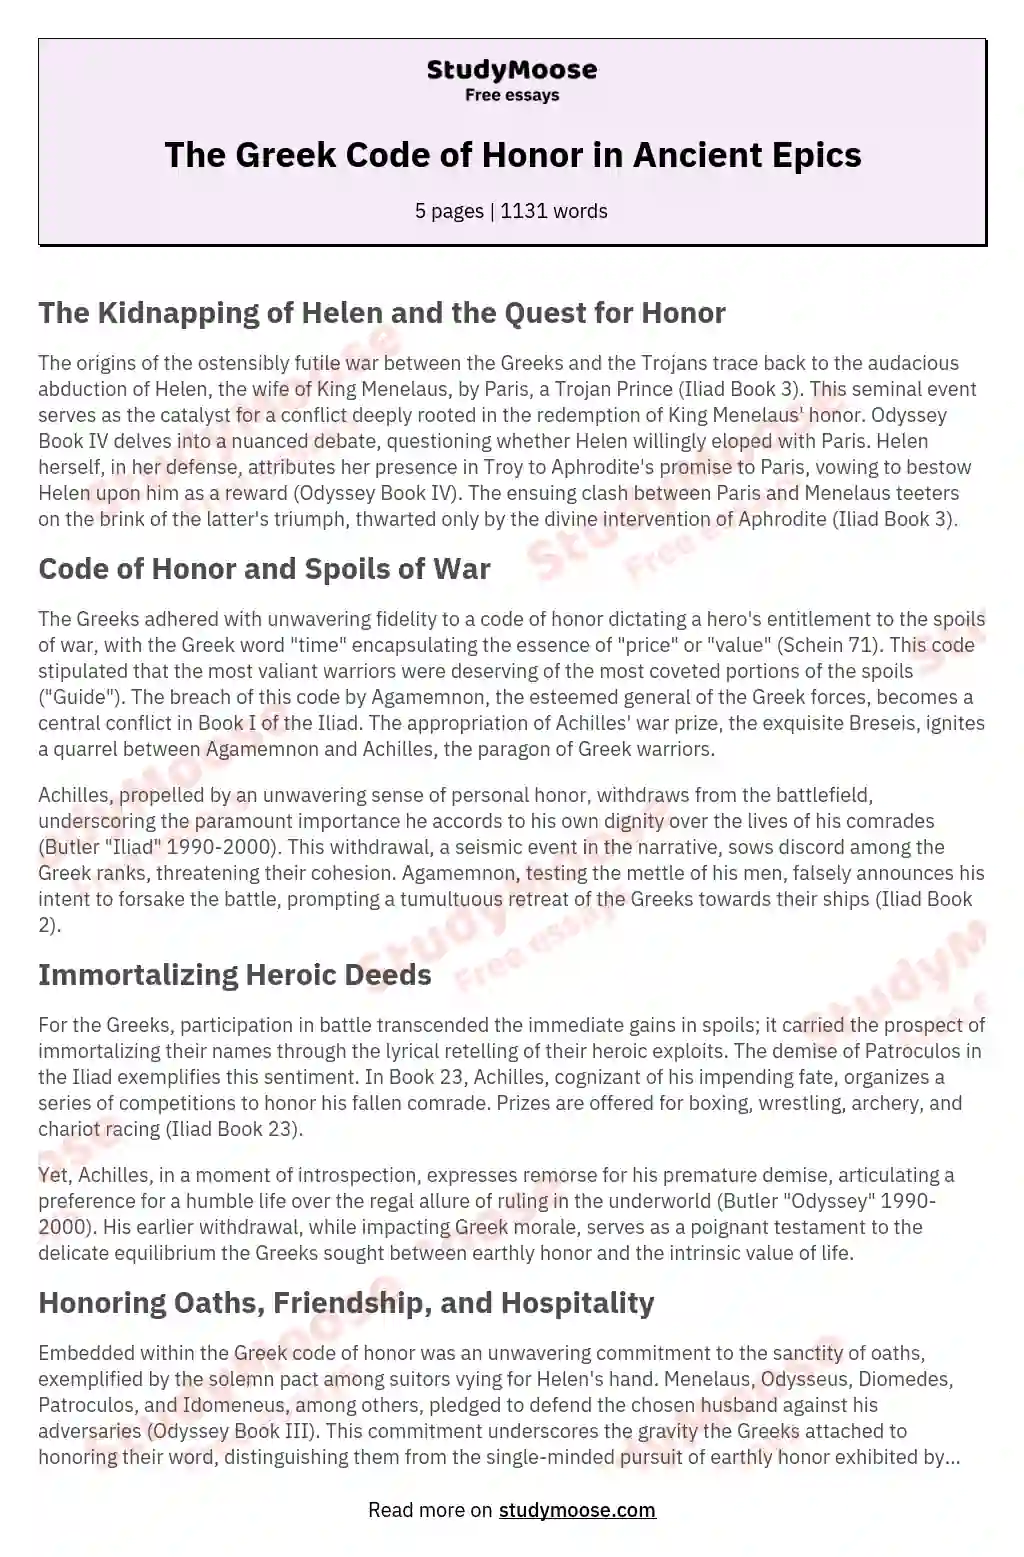 The ancient greek code of honor as demonstrated in Iliad and Odyssey